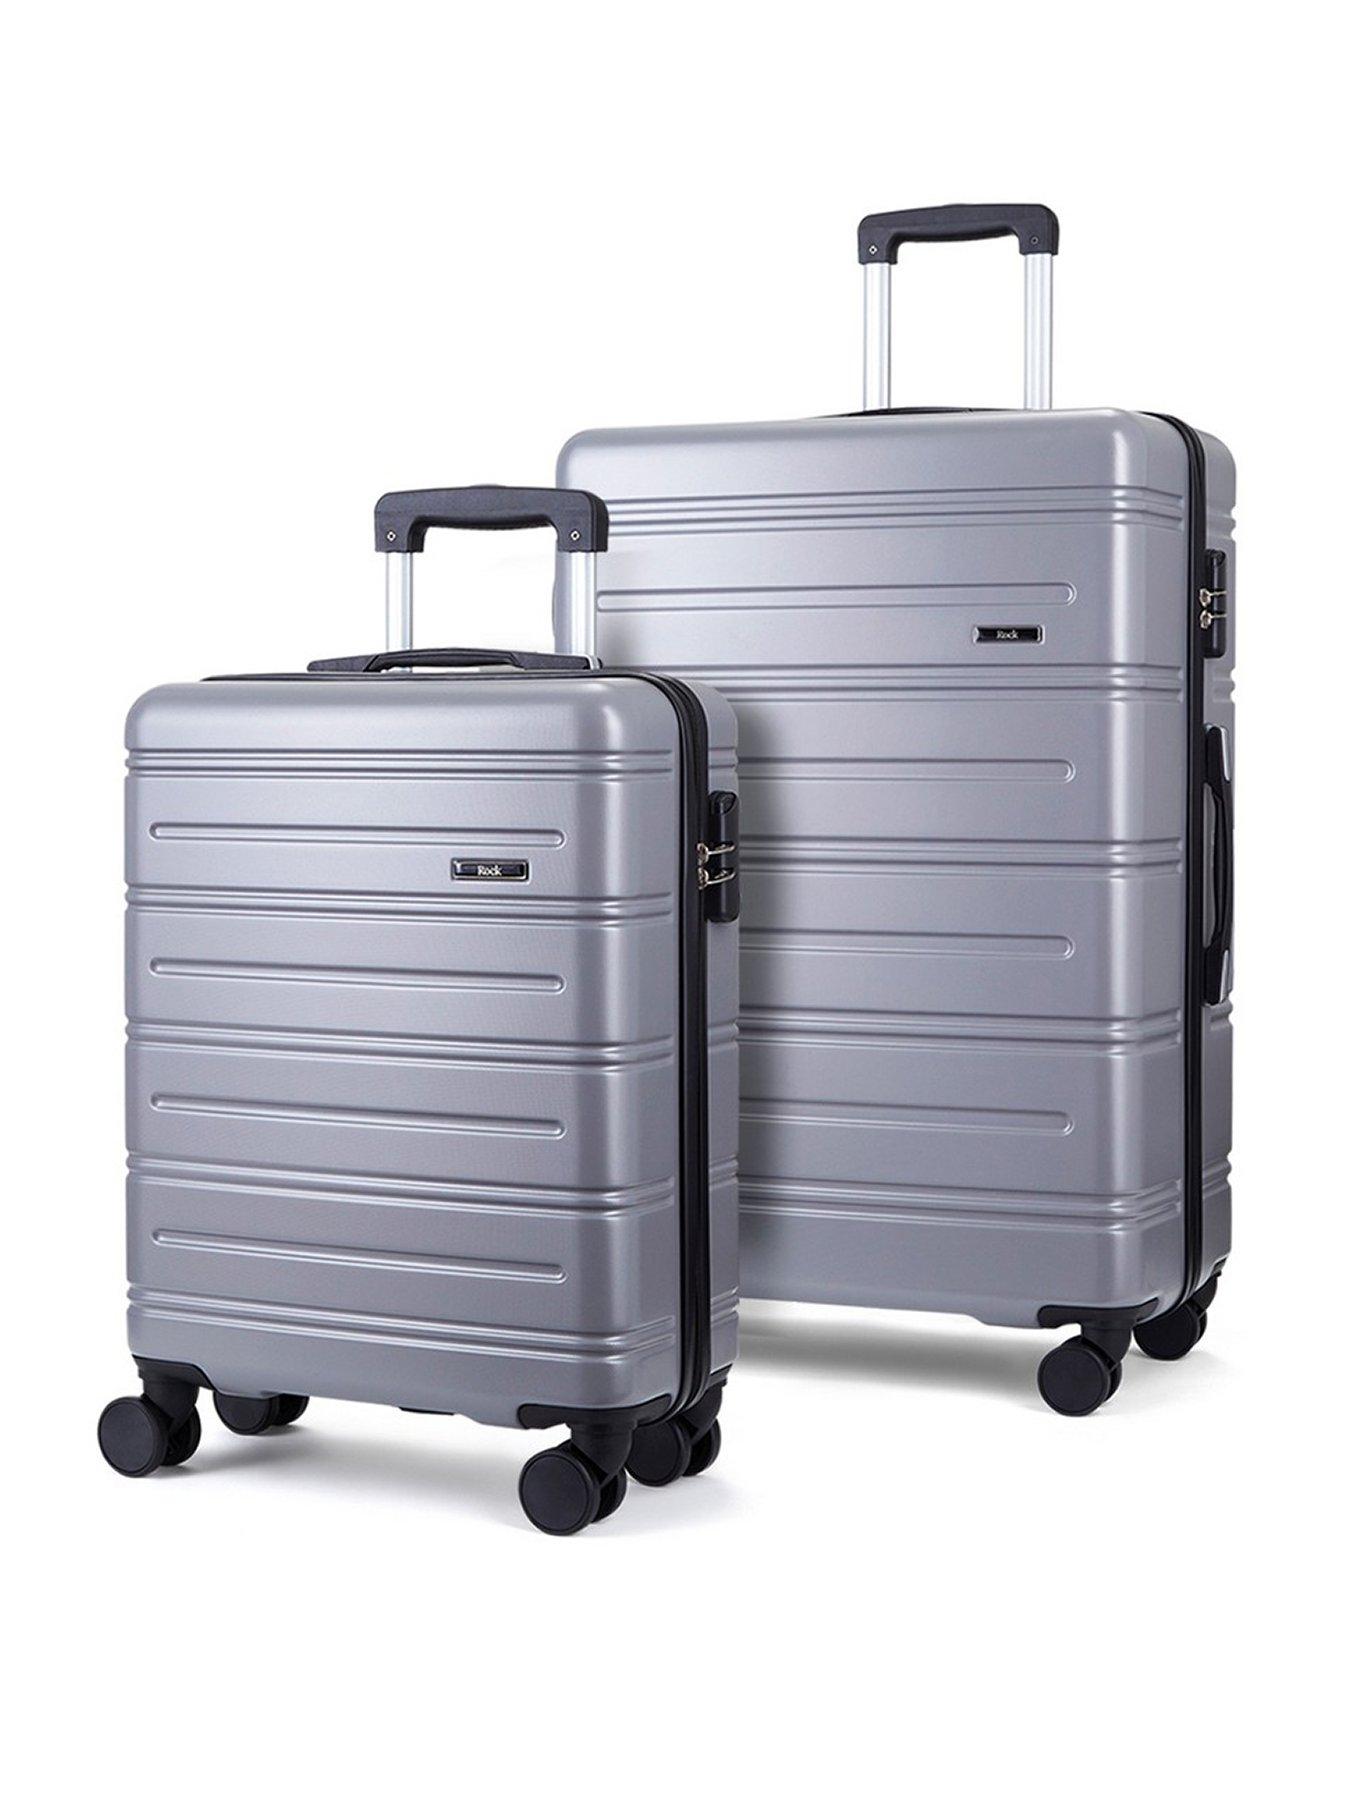 Wrangler 2 Pc. Quest Collection Spinner Travel Luggage Set -Pelican